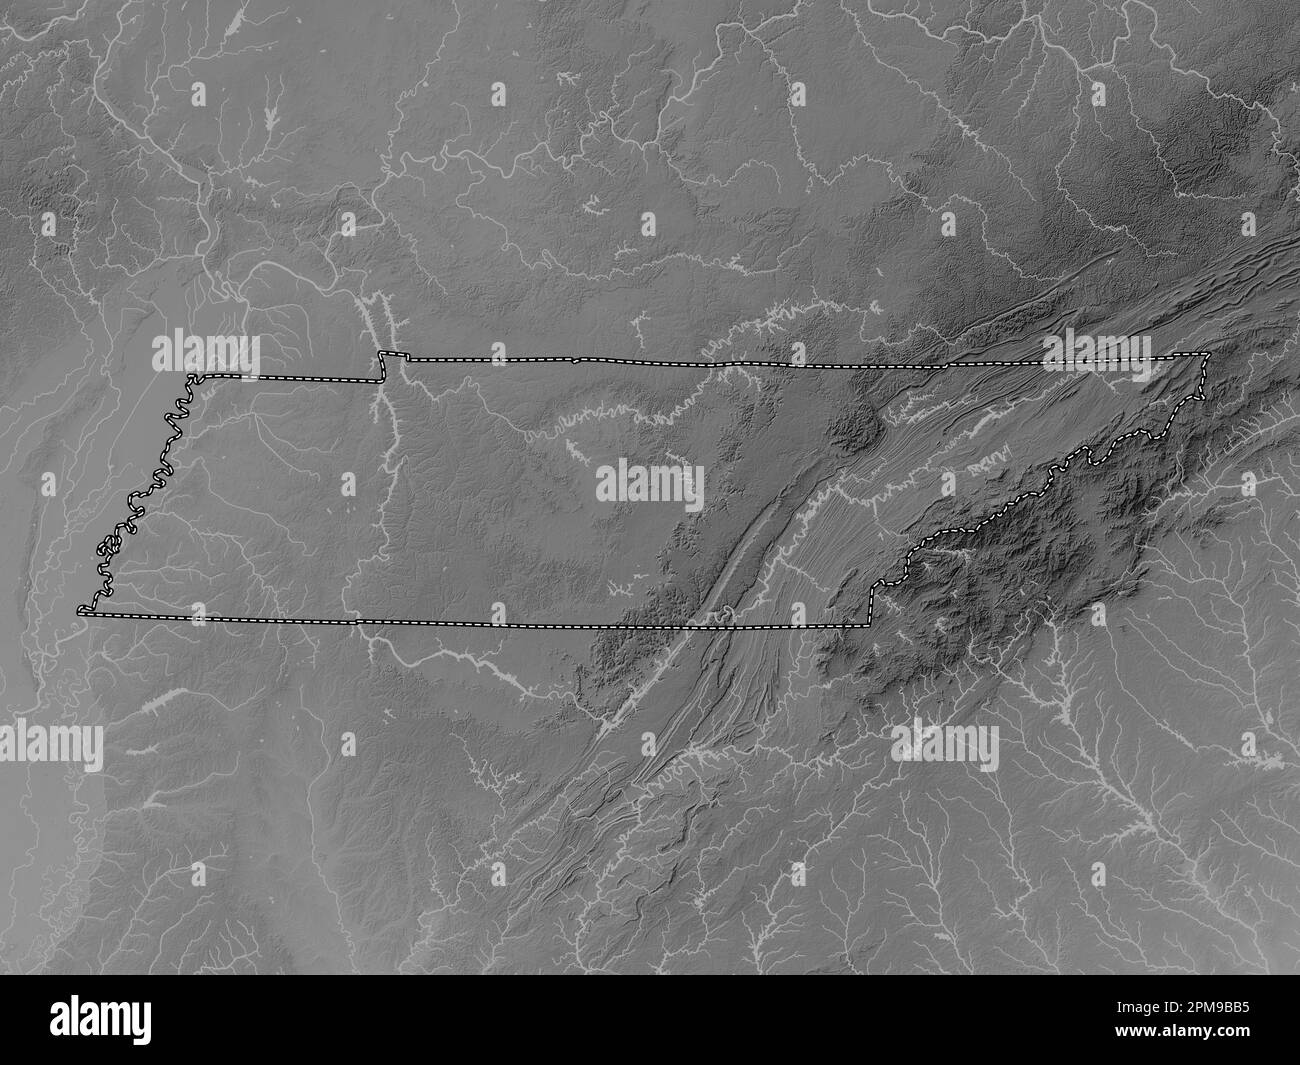 Tennessee, state of United States of America. Grayscale elevation map with lakes and rivers Stock Photo